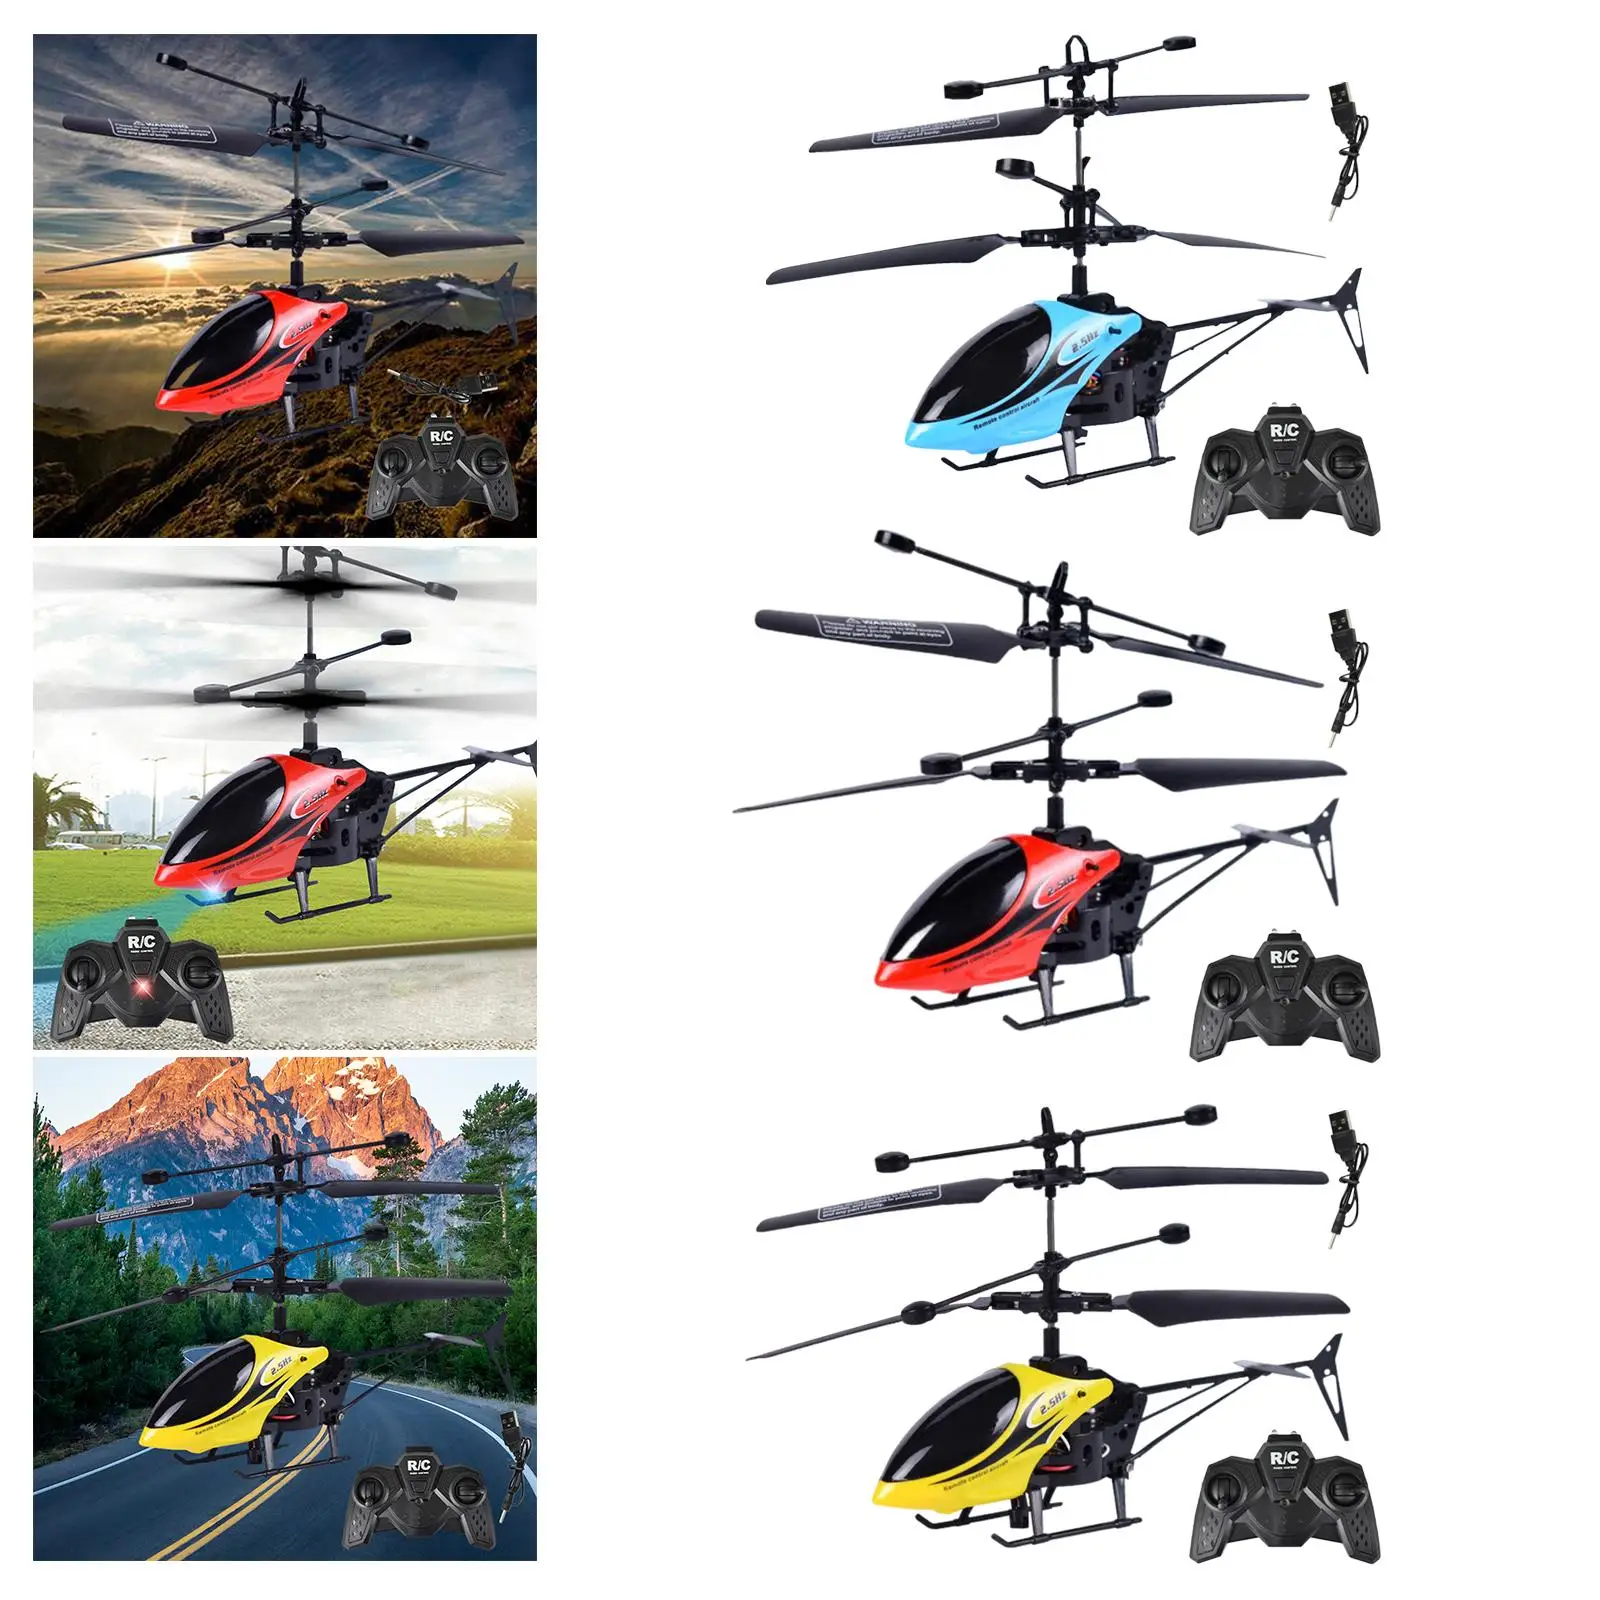 2 Channel Remote Control Helicopter Airplanes Aircraft Fighter with Light Plane RC Drone for Kids Beginners Children Adults Boys